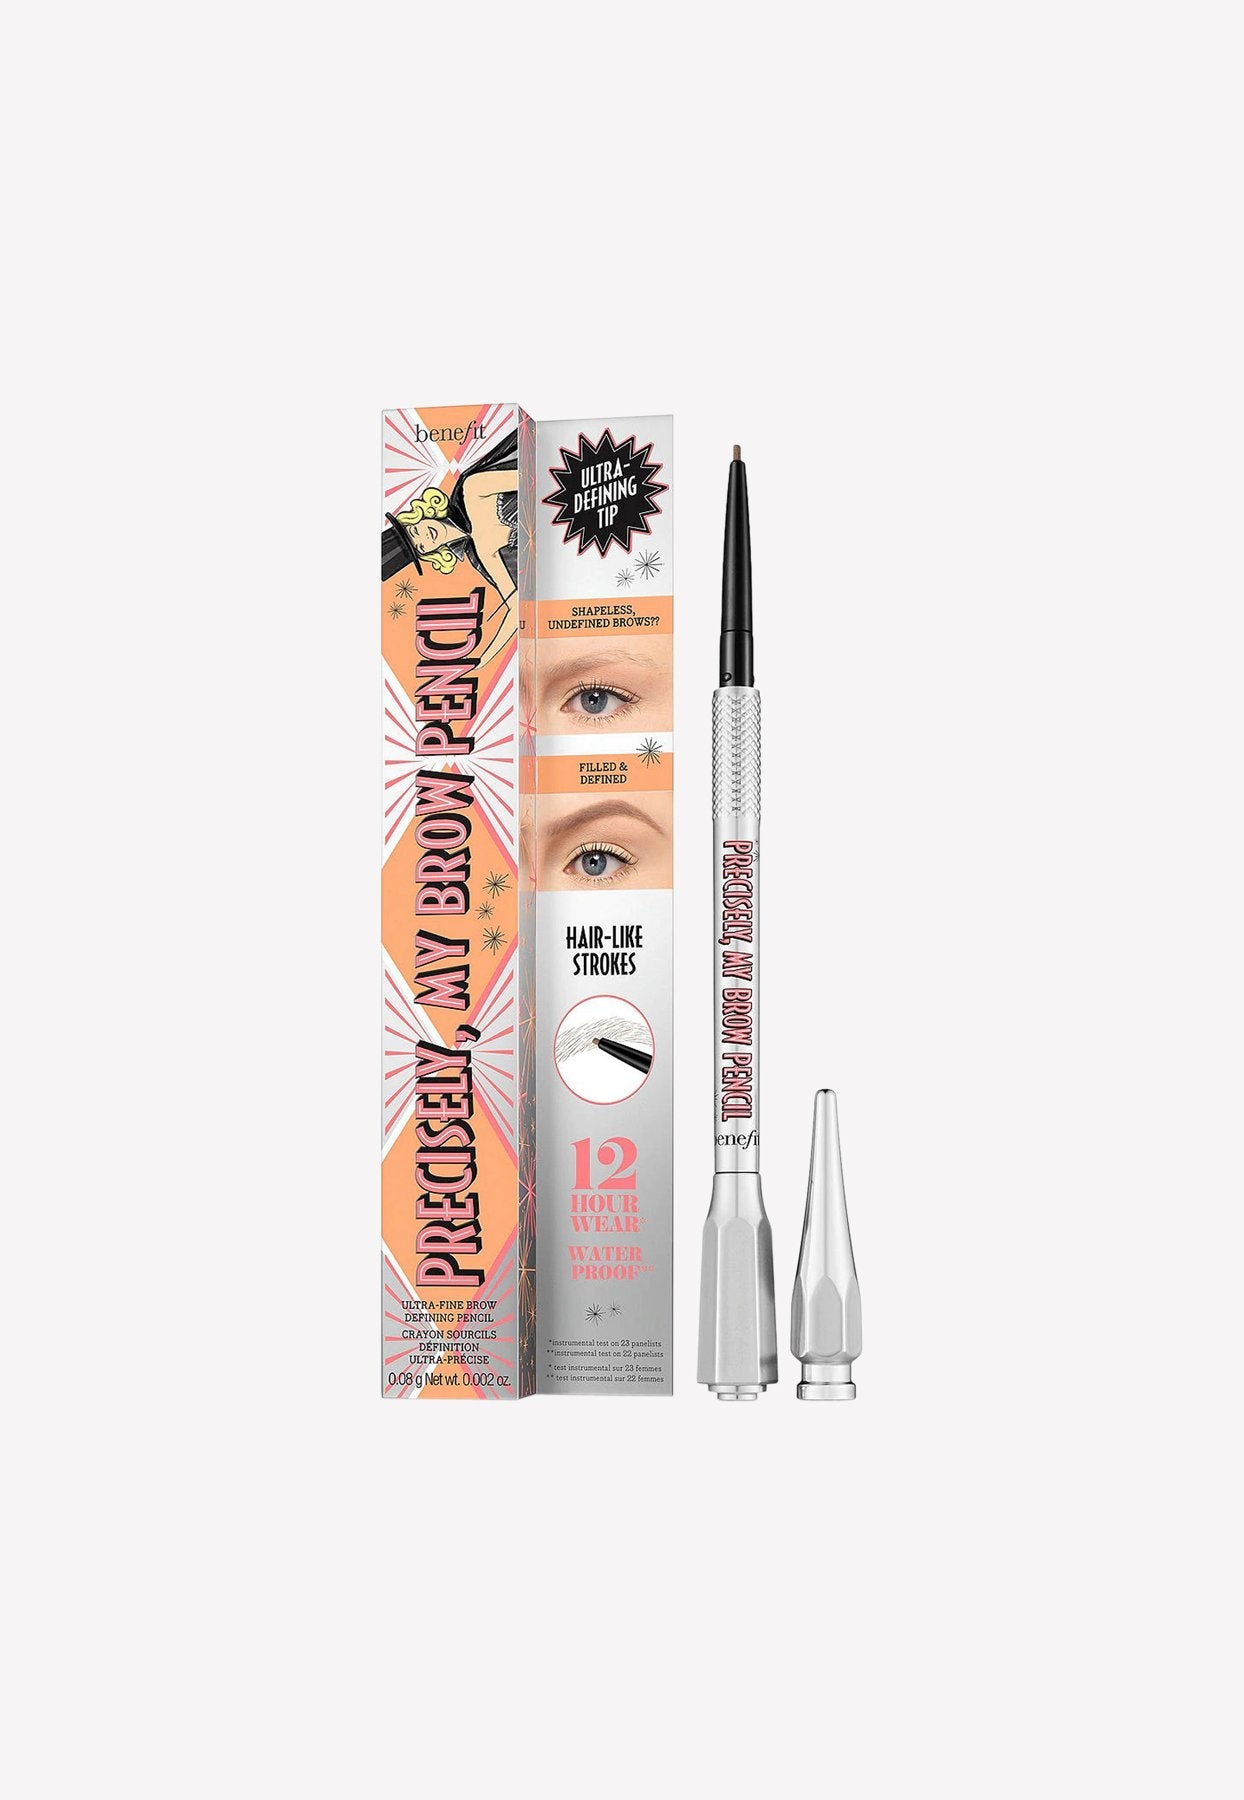 Precisely, My Brow Eyebrow Pencil - Shade 4.5 Brown 0.08 g